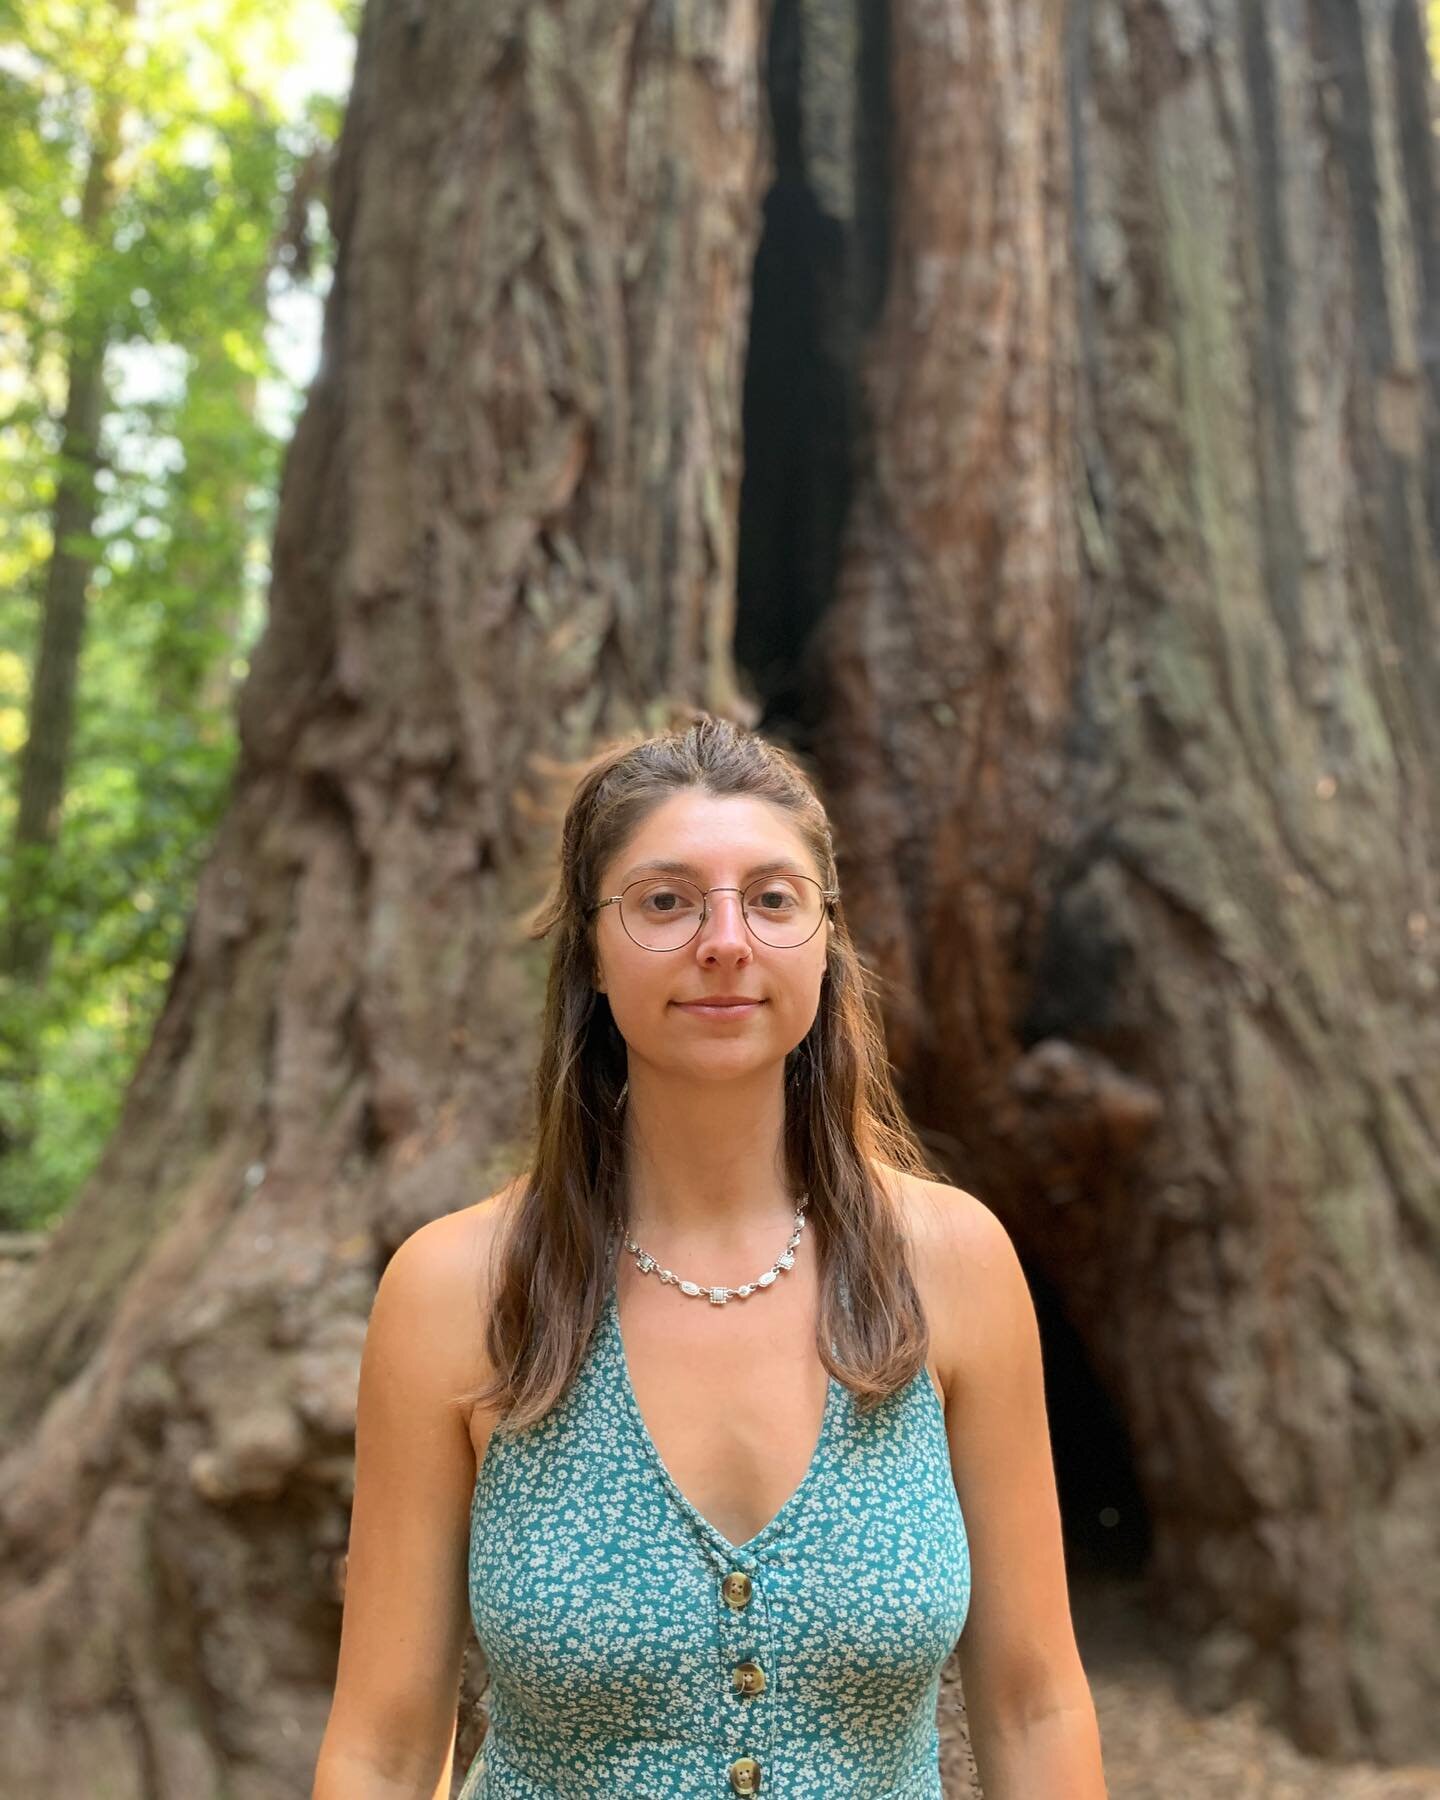 &bull;Amongst Mothers&bull; 
Reflecting in the circular groves my duties as a mother. Weaving through the burned heartwood of these redwood giants brings me closer to my child 
🙏🏽🌲🙏🏽
.
.
.
.
.
.
.
.
.
#redwood #ecology #naturalhistory #restorati